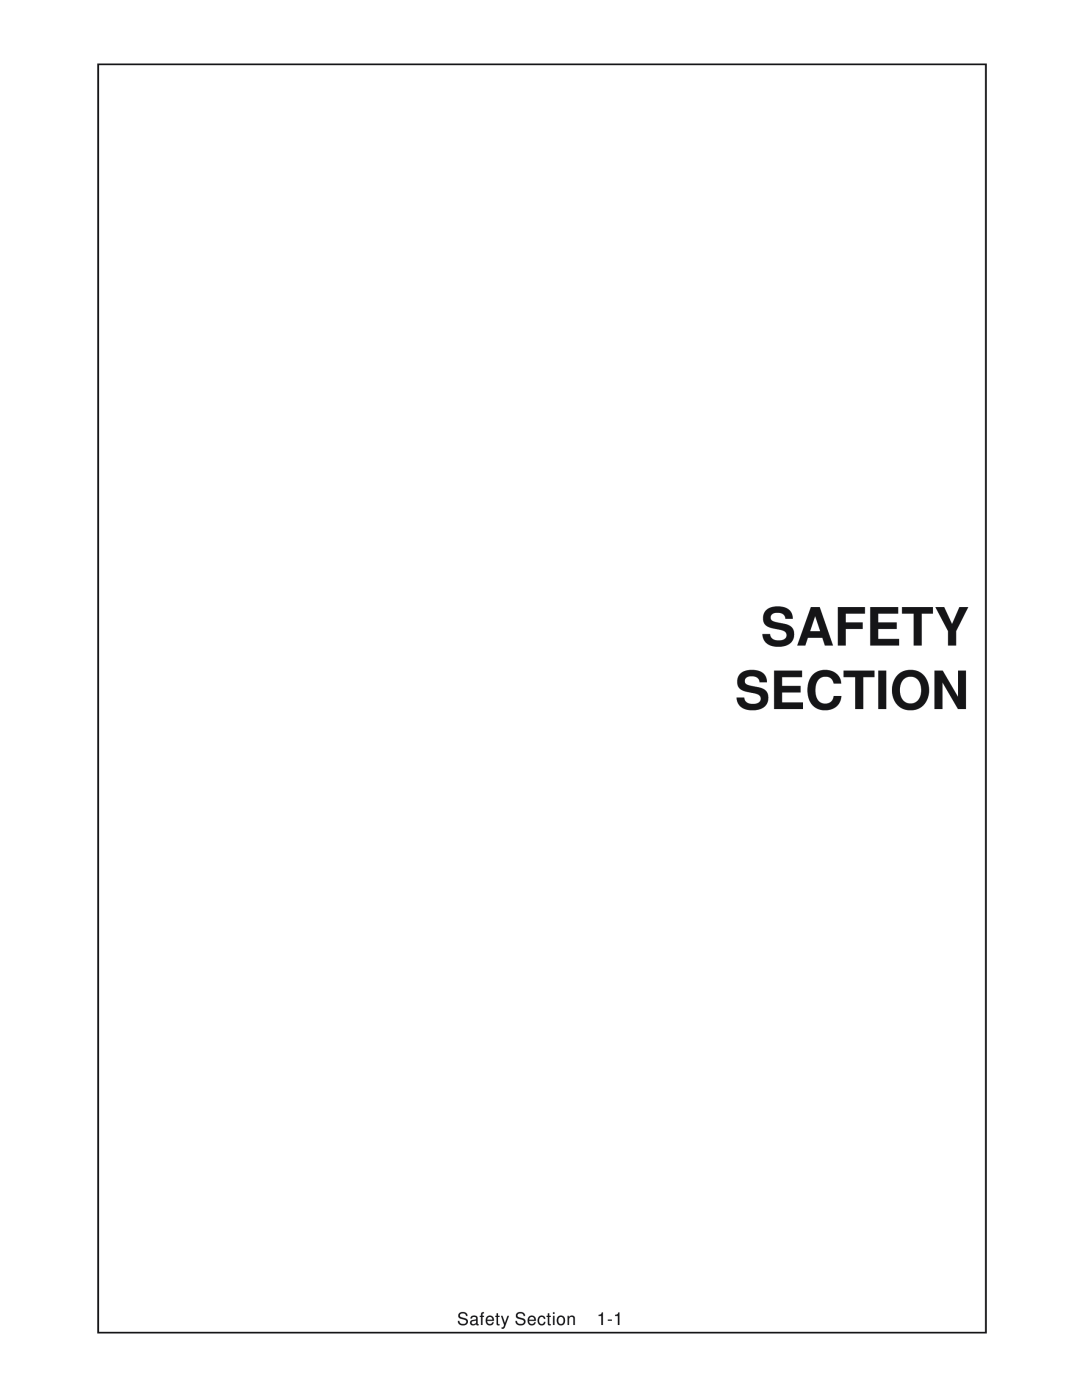 Tiger Products Co., Ltd RBF-12C manual Safety Section 